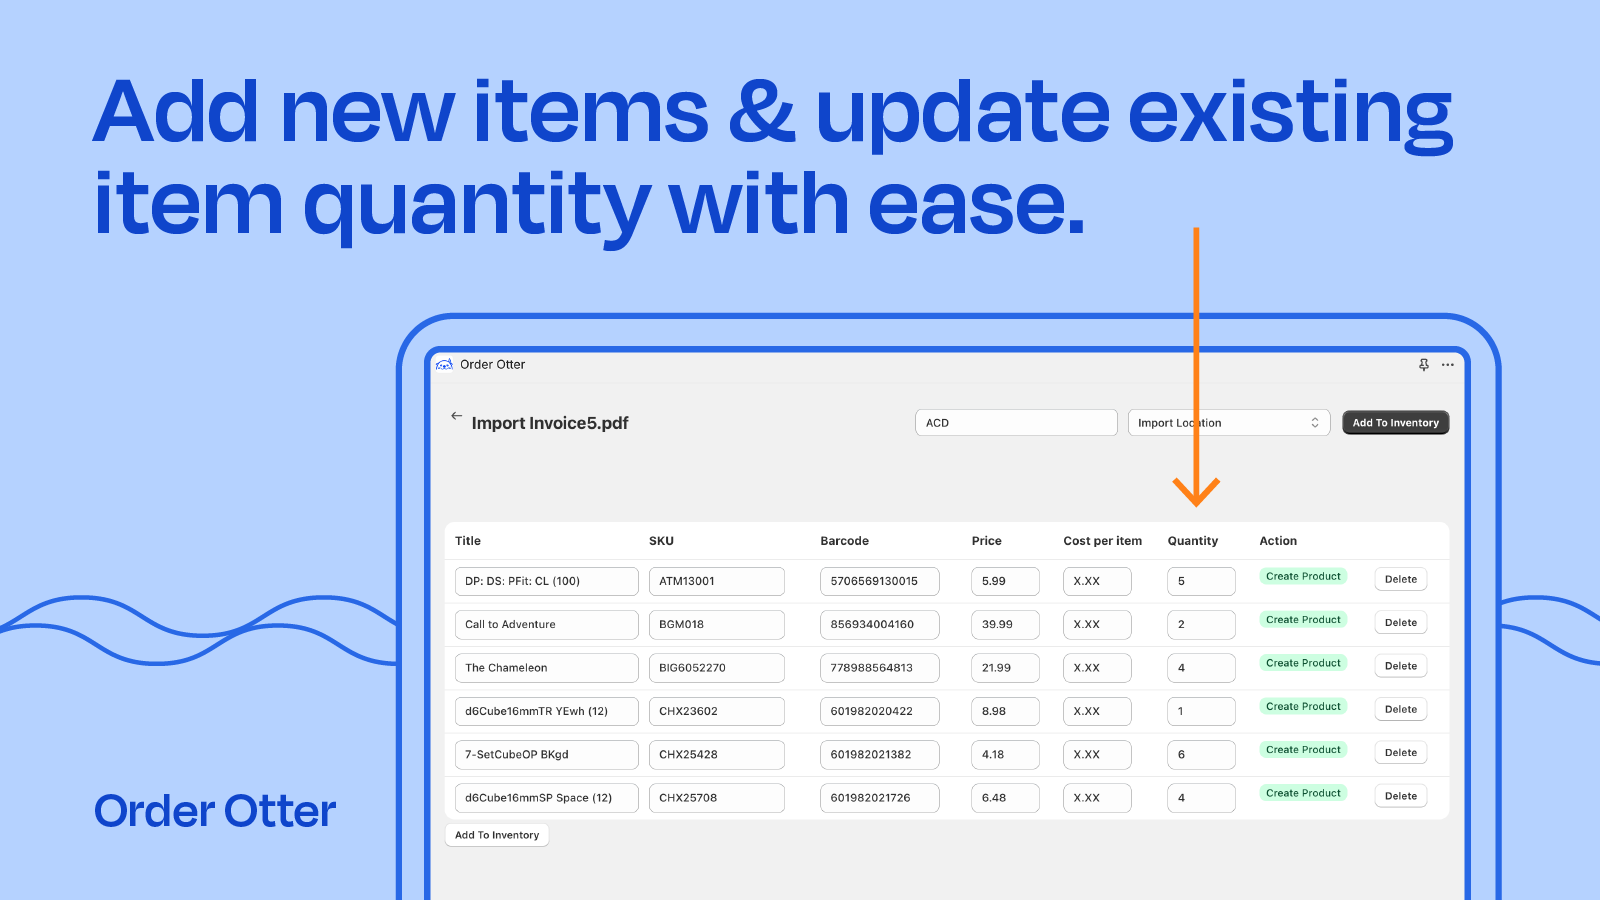 Add new items and update existing item quantities with ease.